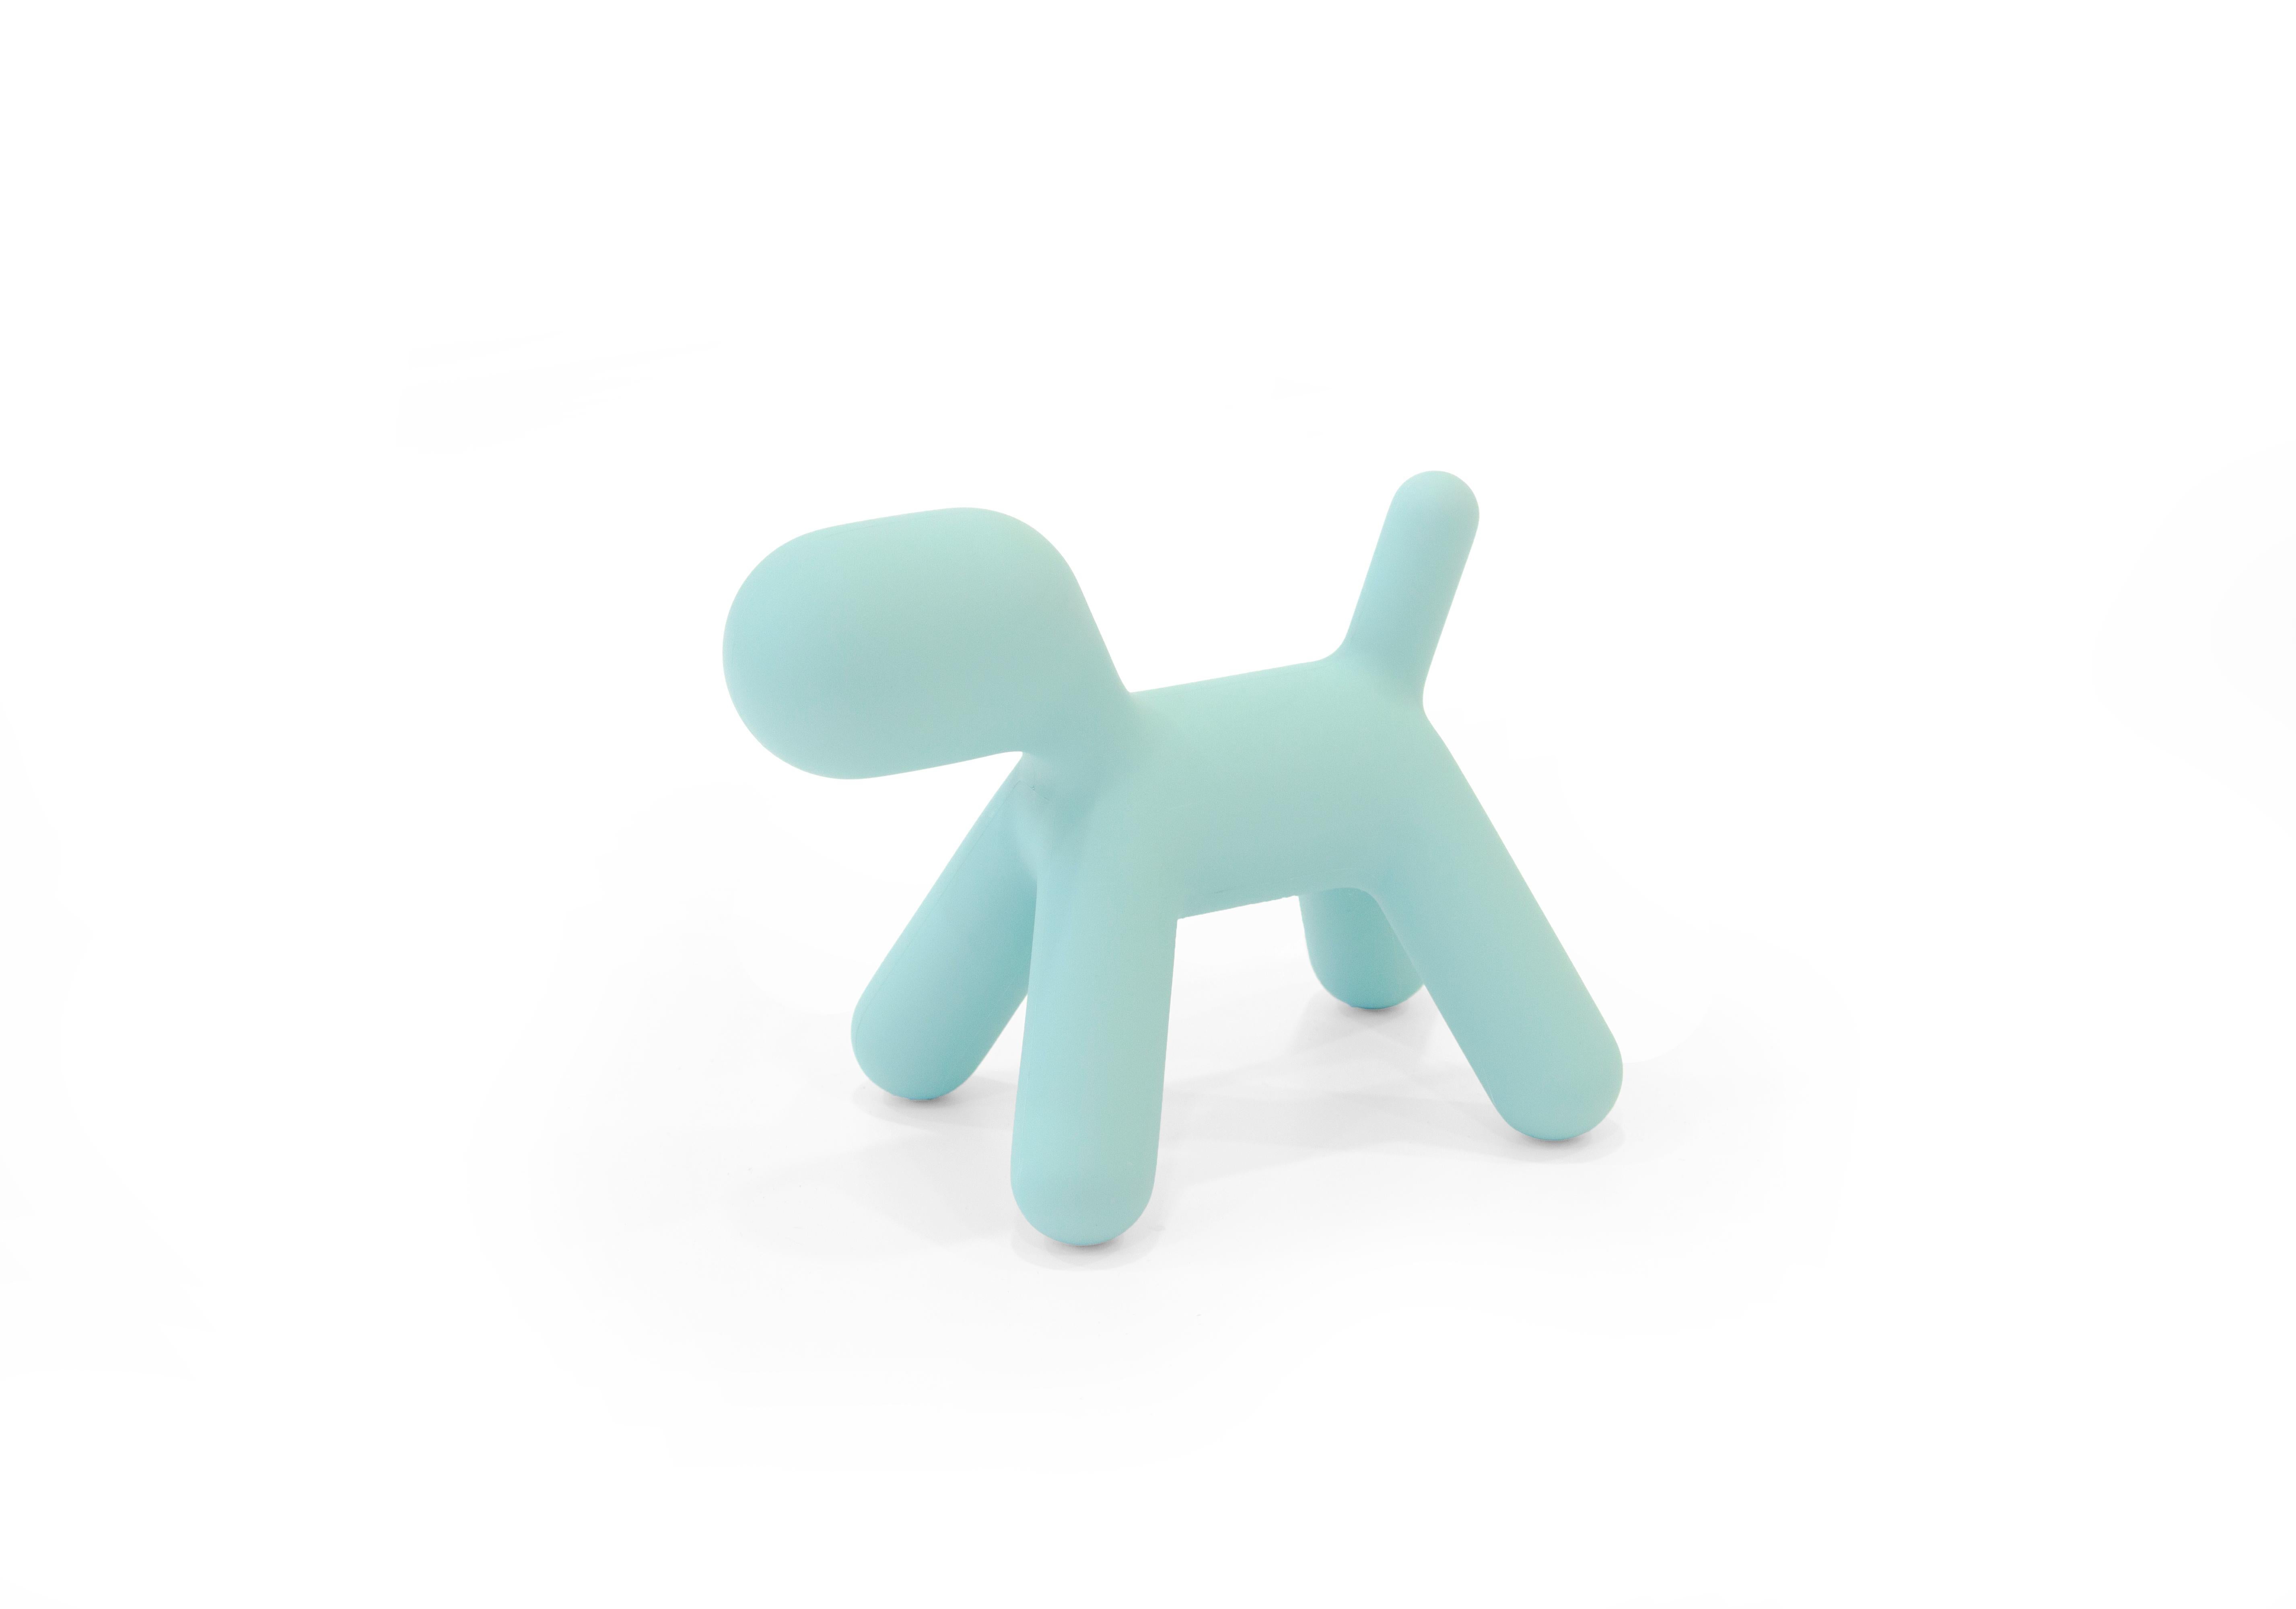 Plastic Puppy M in White by Eero Aarnio for Magis For Sale